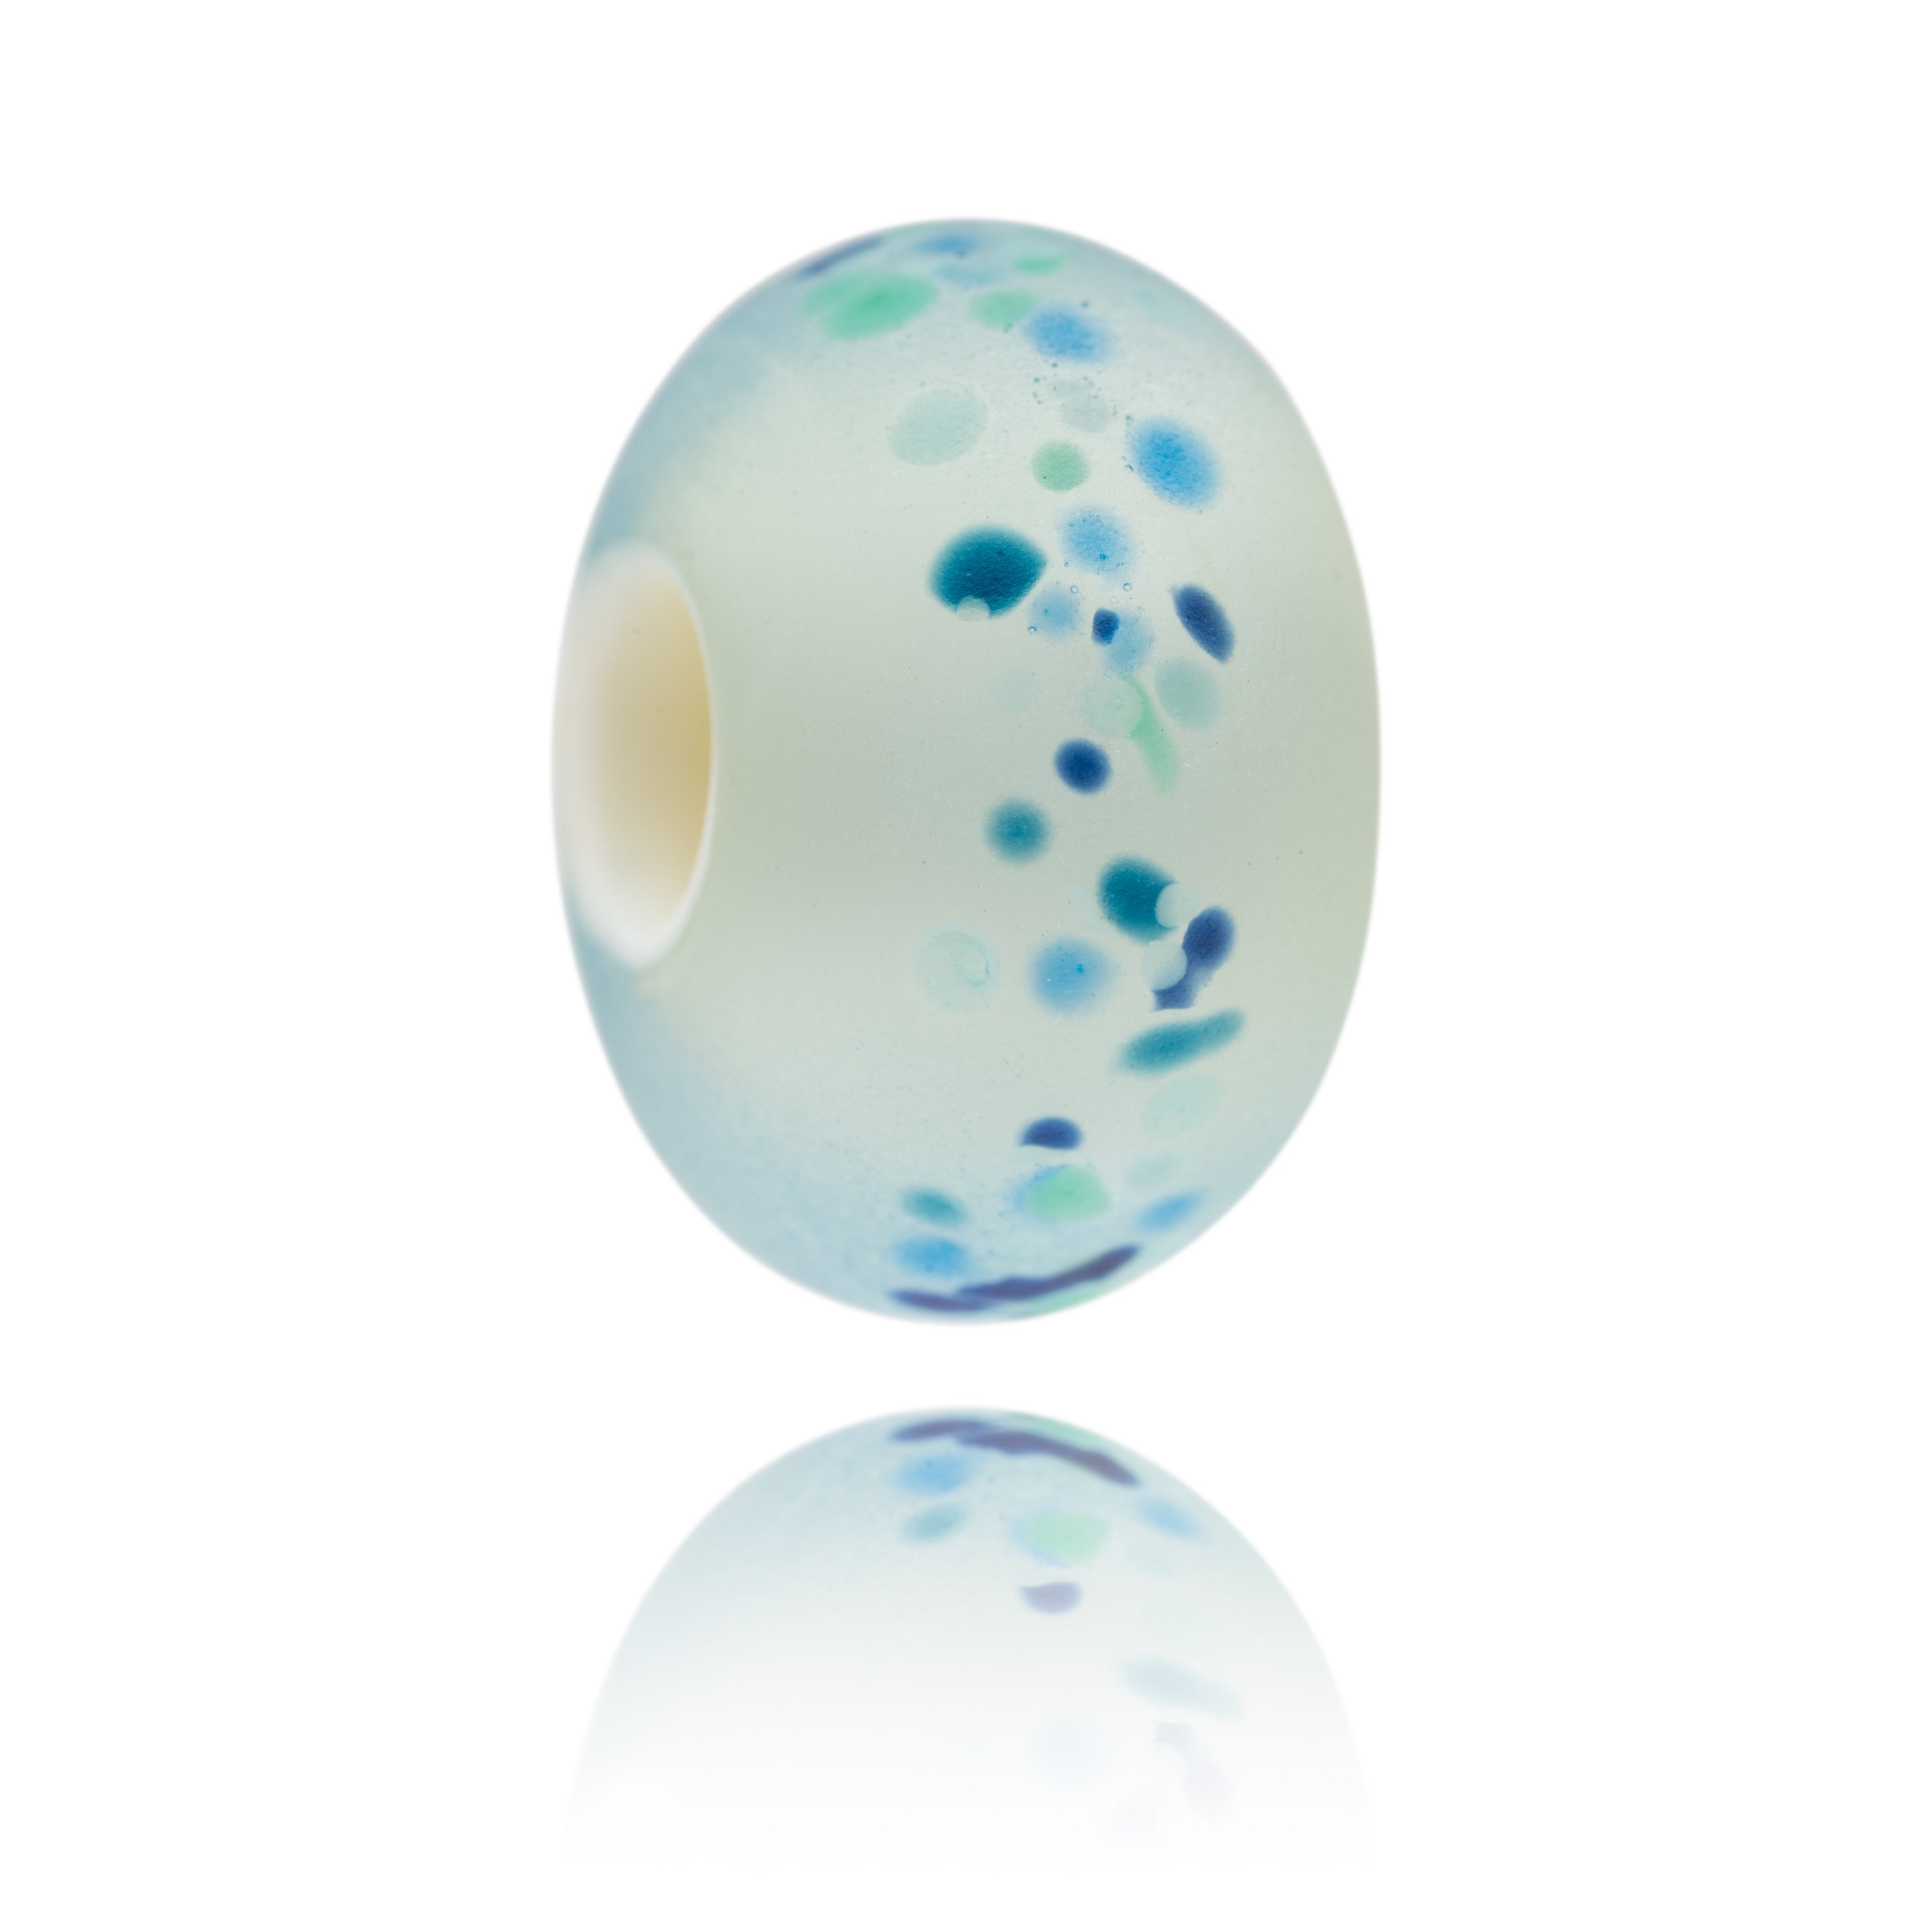 Frosted glass beads decorated with speckles of blue and green glass.